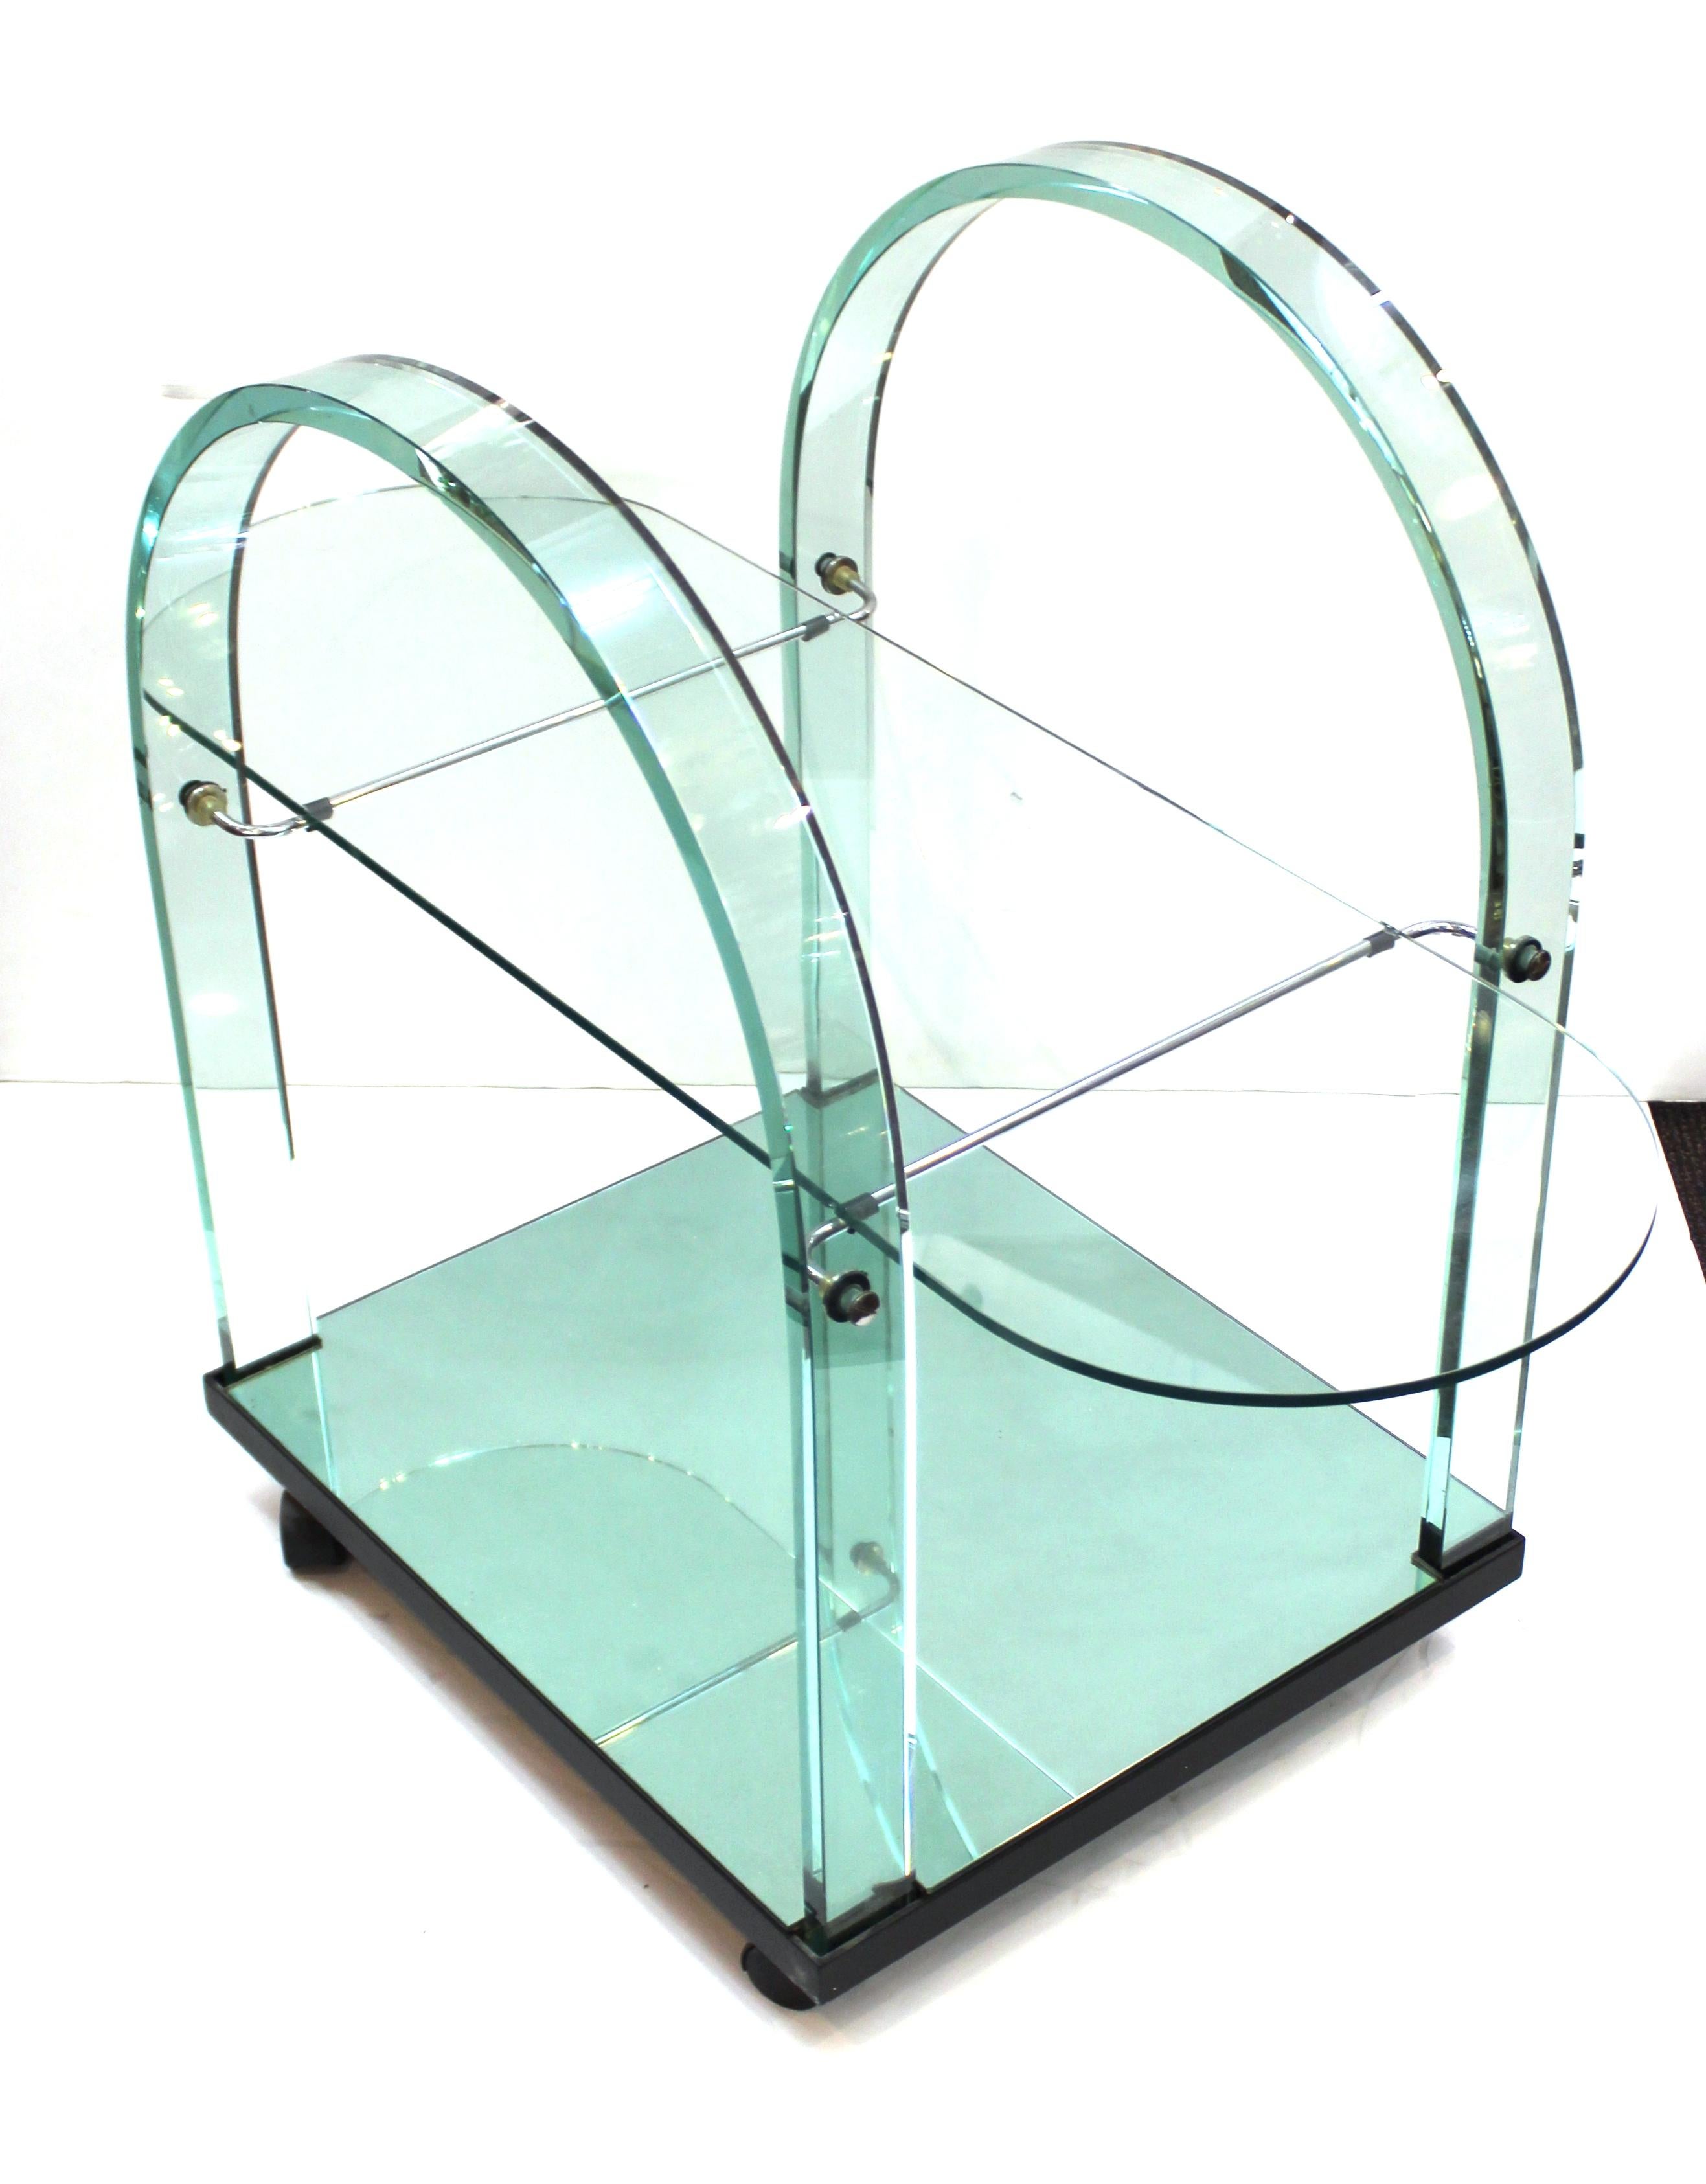 Italian modern bar or tea cart designed by FIAM in the circa 1970s. The piece has a mirrored bottom and a heavy curved glass handle structure, which is a specialty of FIAM, a renown Italian glass producer. Makers mark on the base of the leg. In